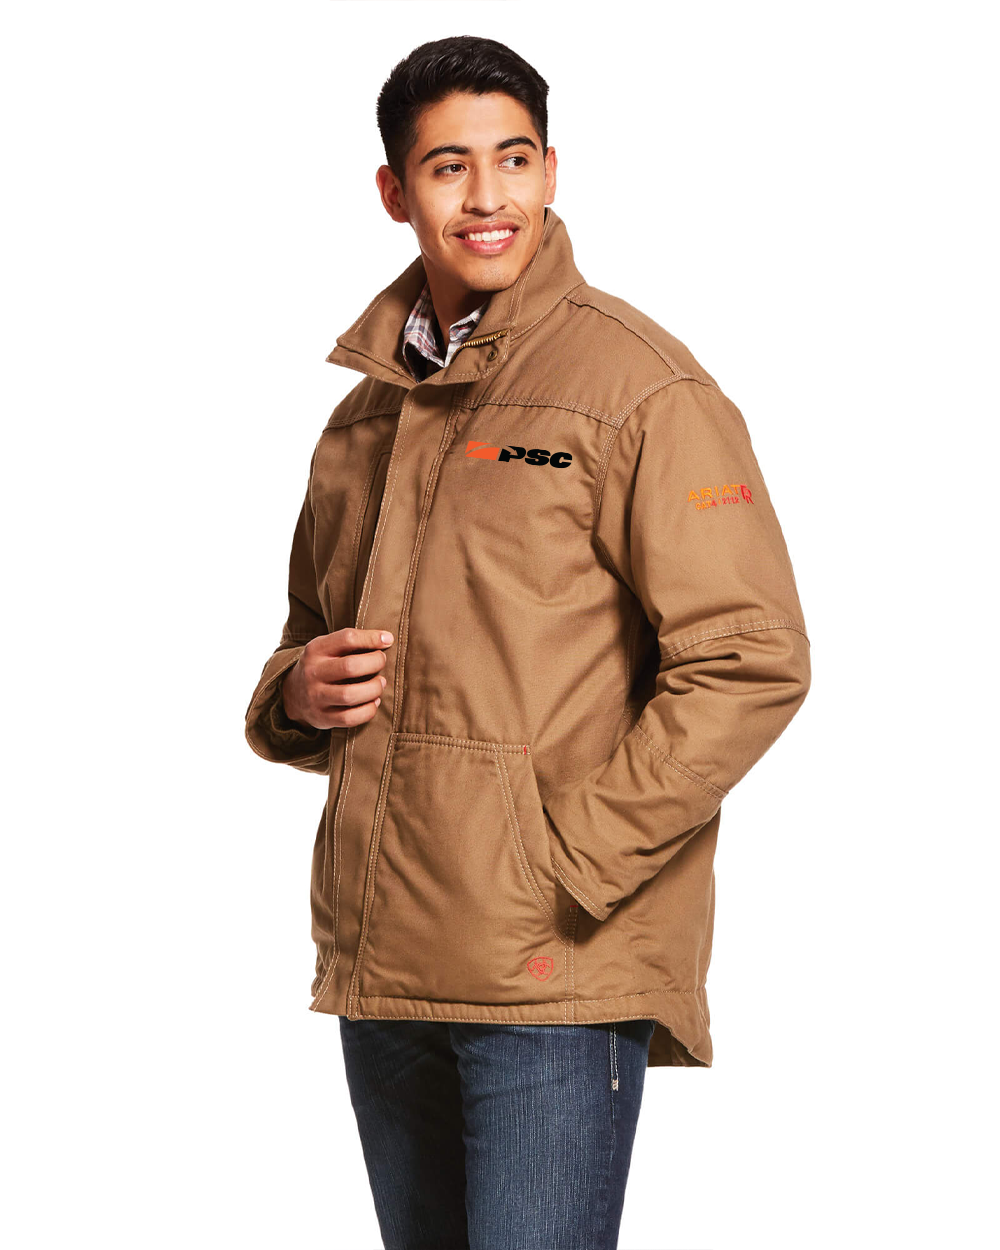 PSC - Ariat FR Workhorse Insulated Jacket